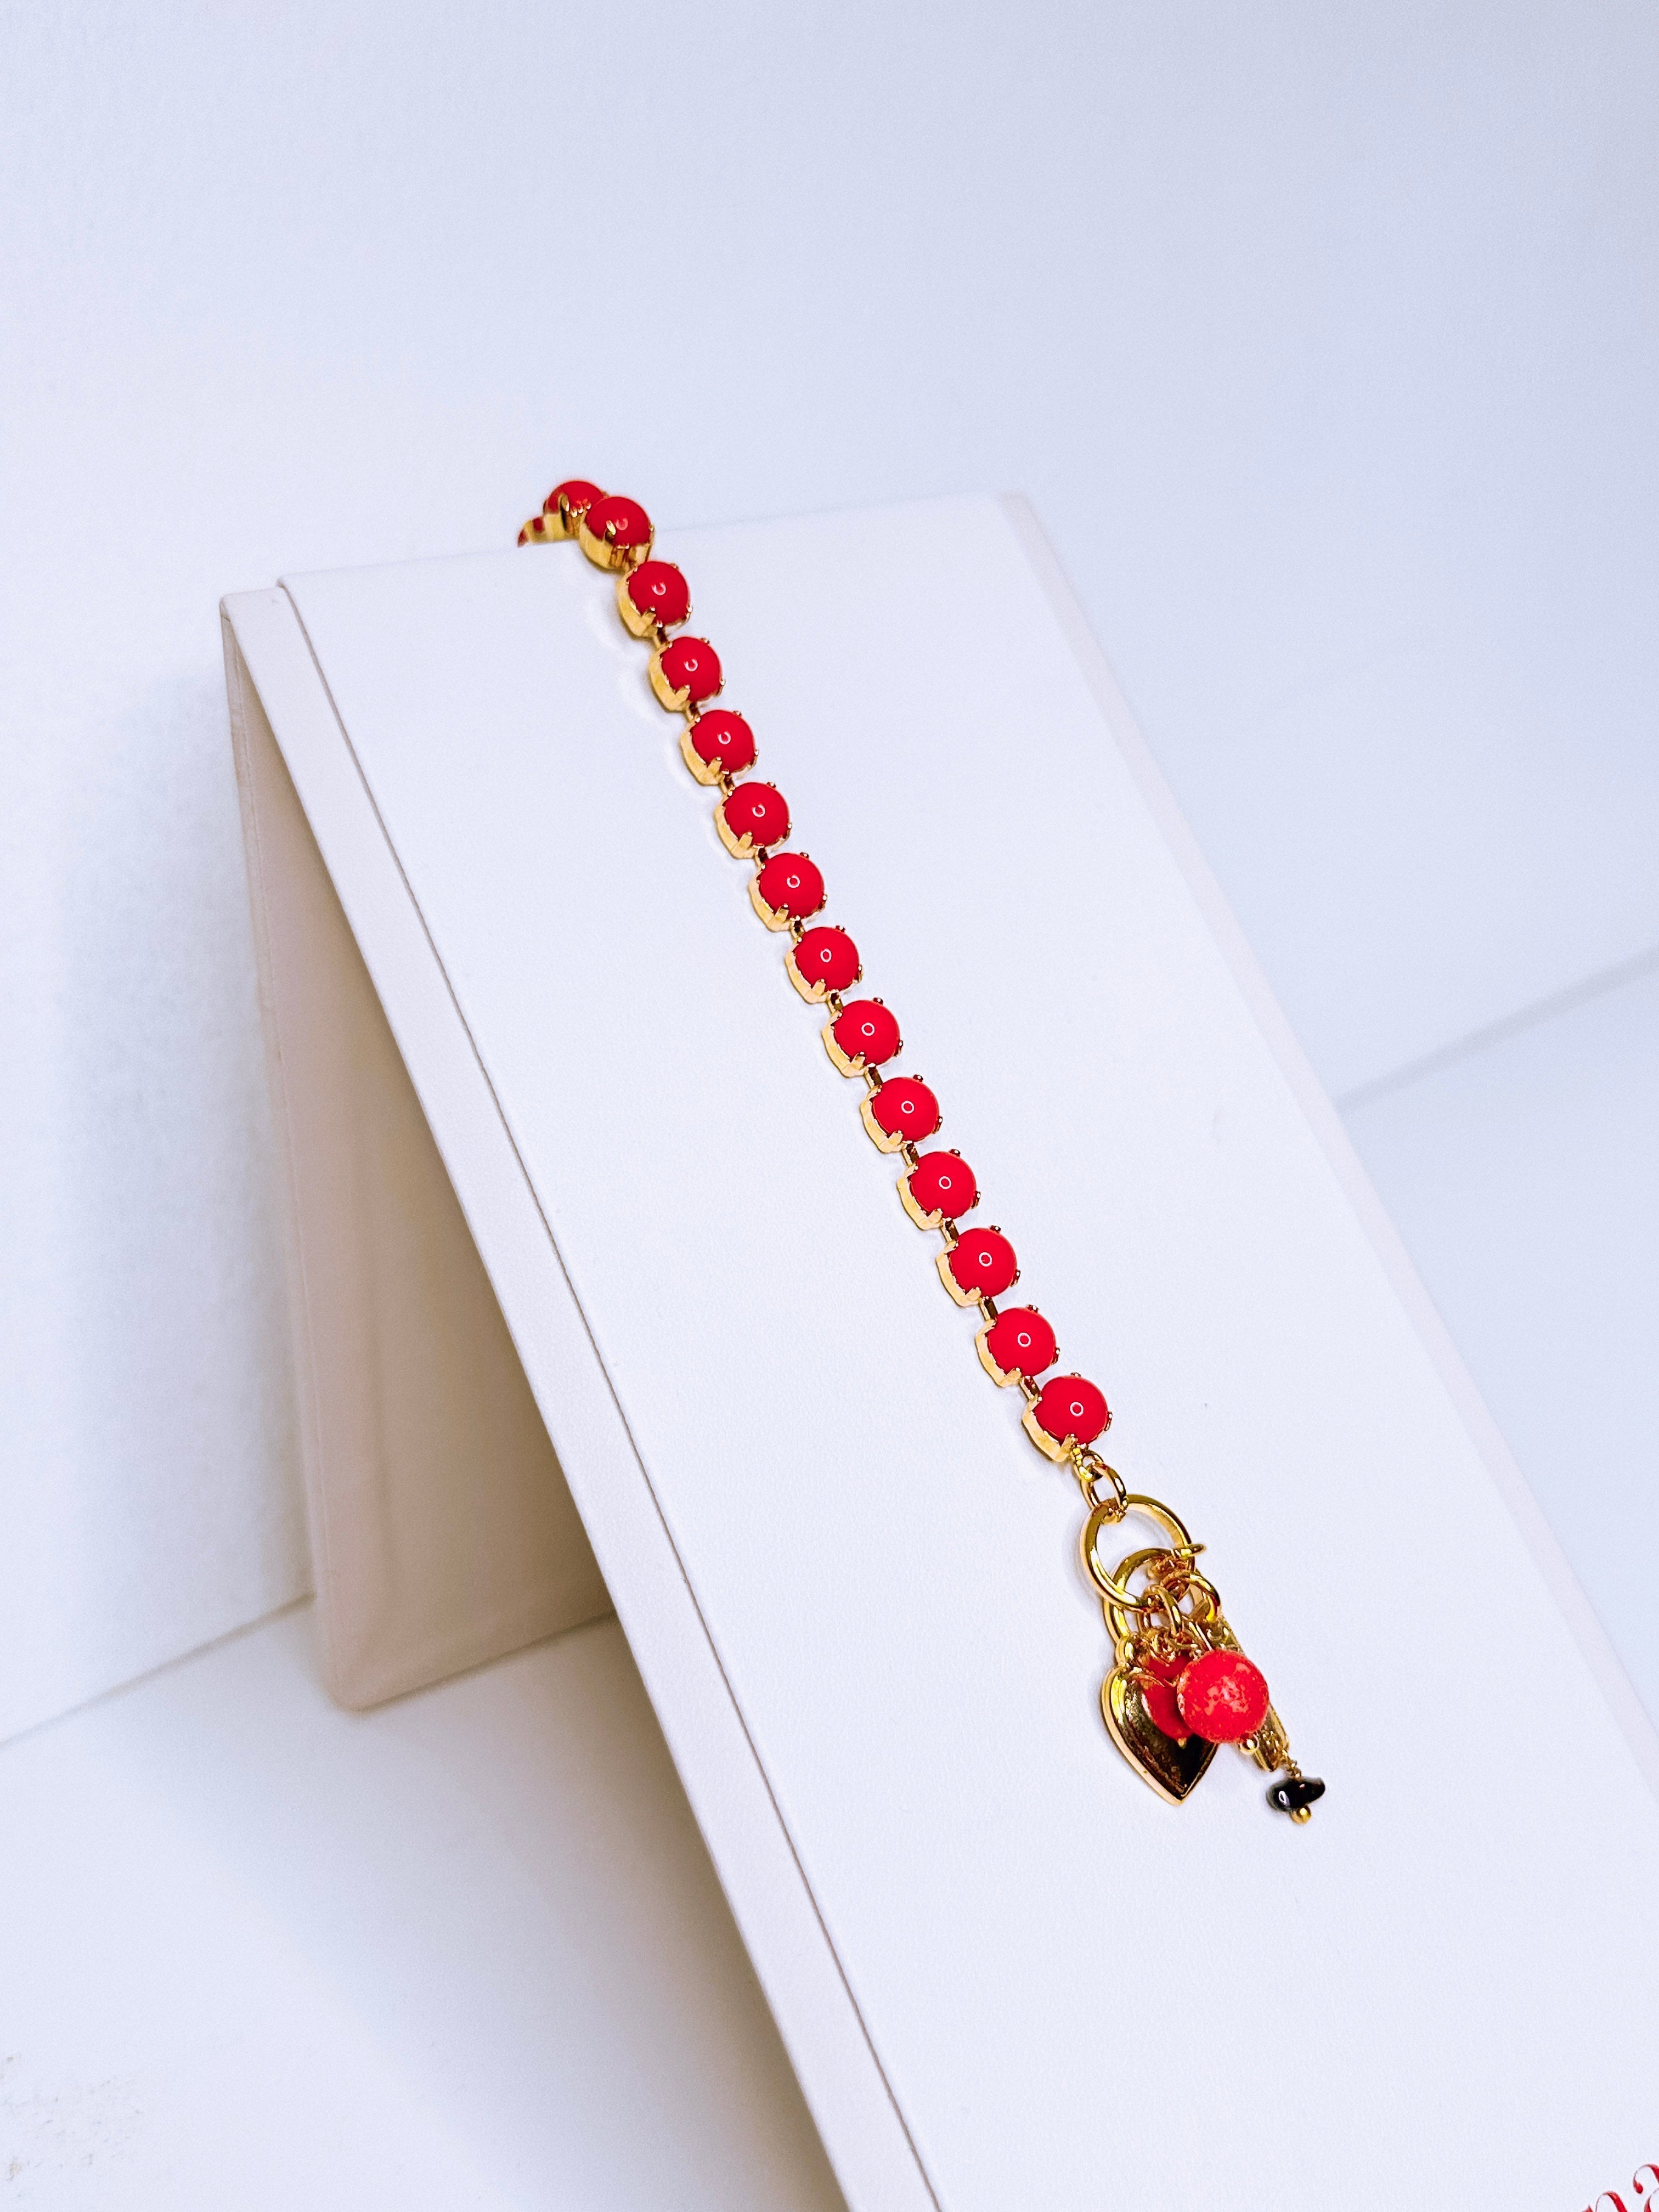 Buy CORAL and 14k Gold Beaded Bracelet Mediterranean Red Coral Bracelet  Genuine Red Coral Bracelet Carved Round Beads Gift for Her Online in India  - Etsy